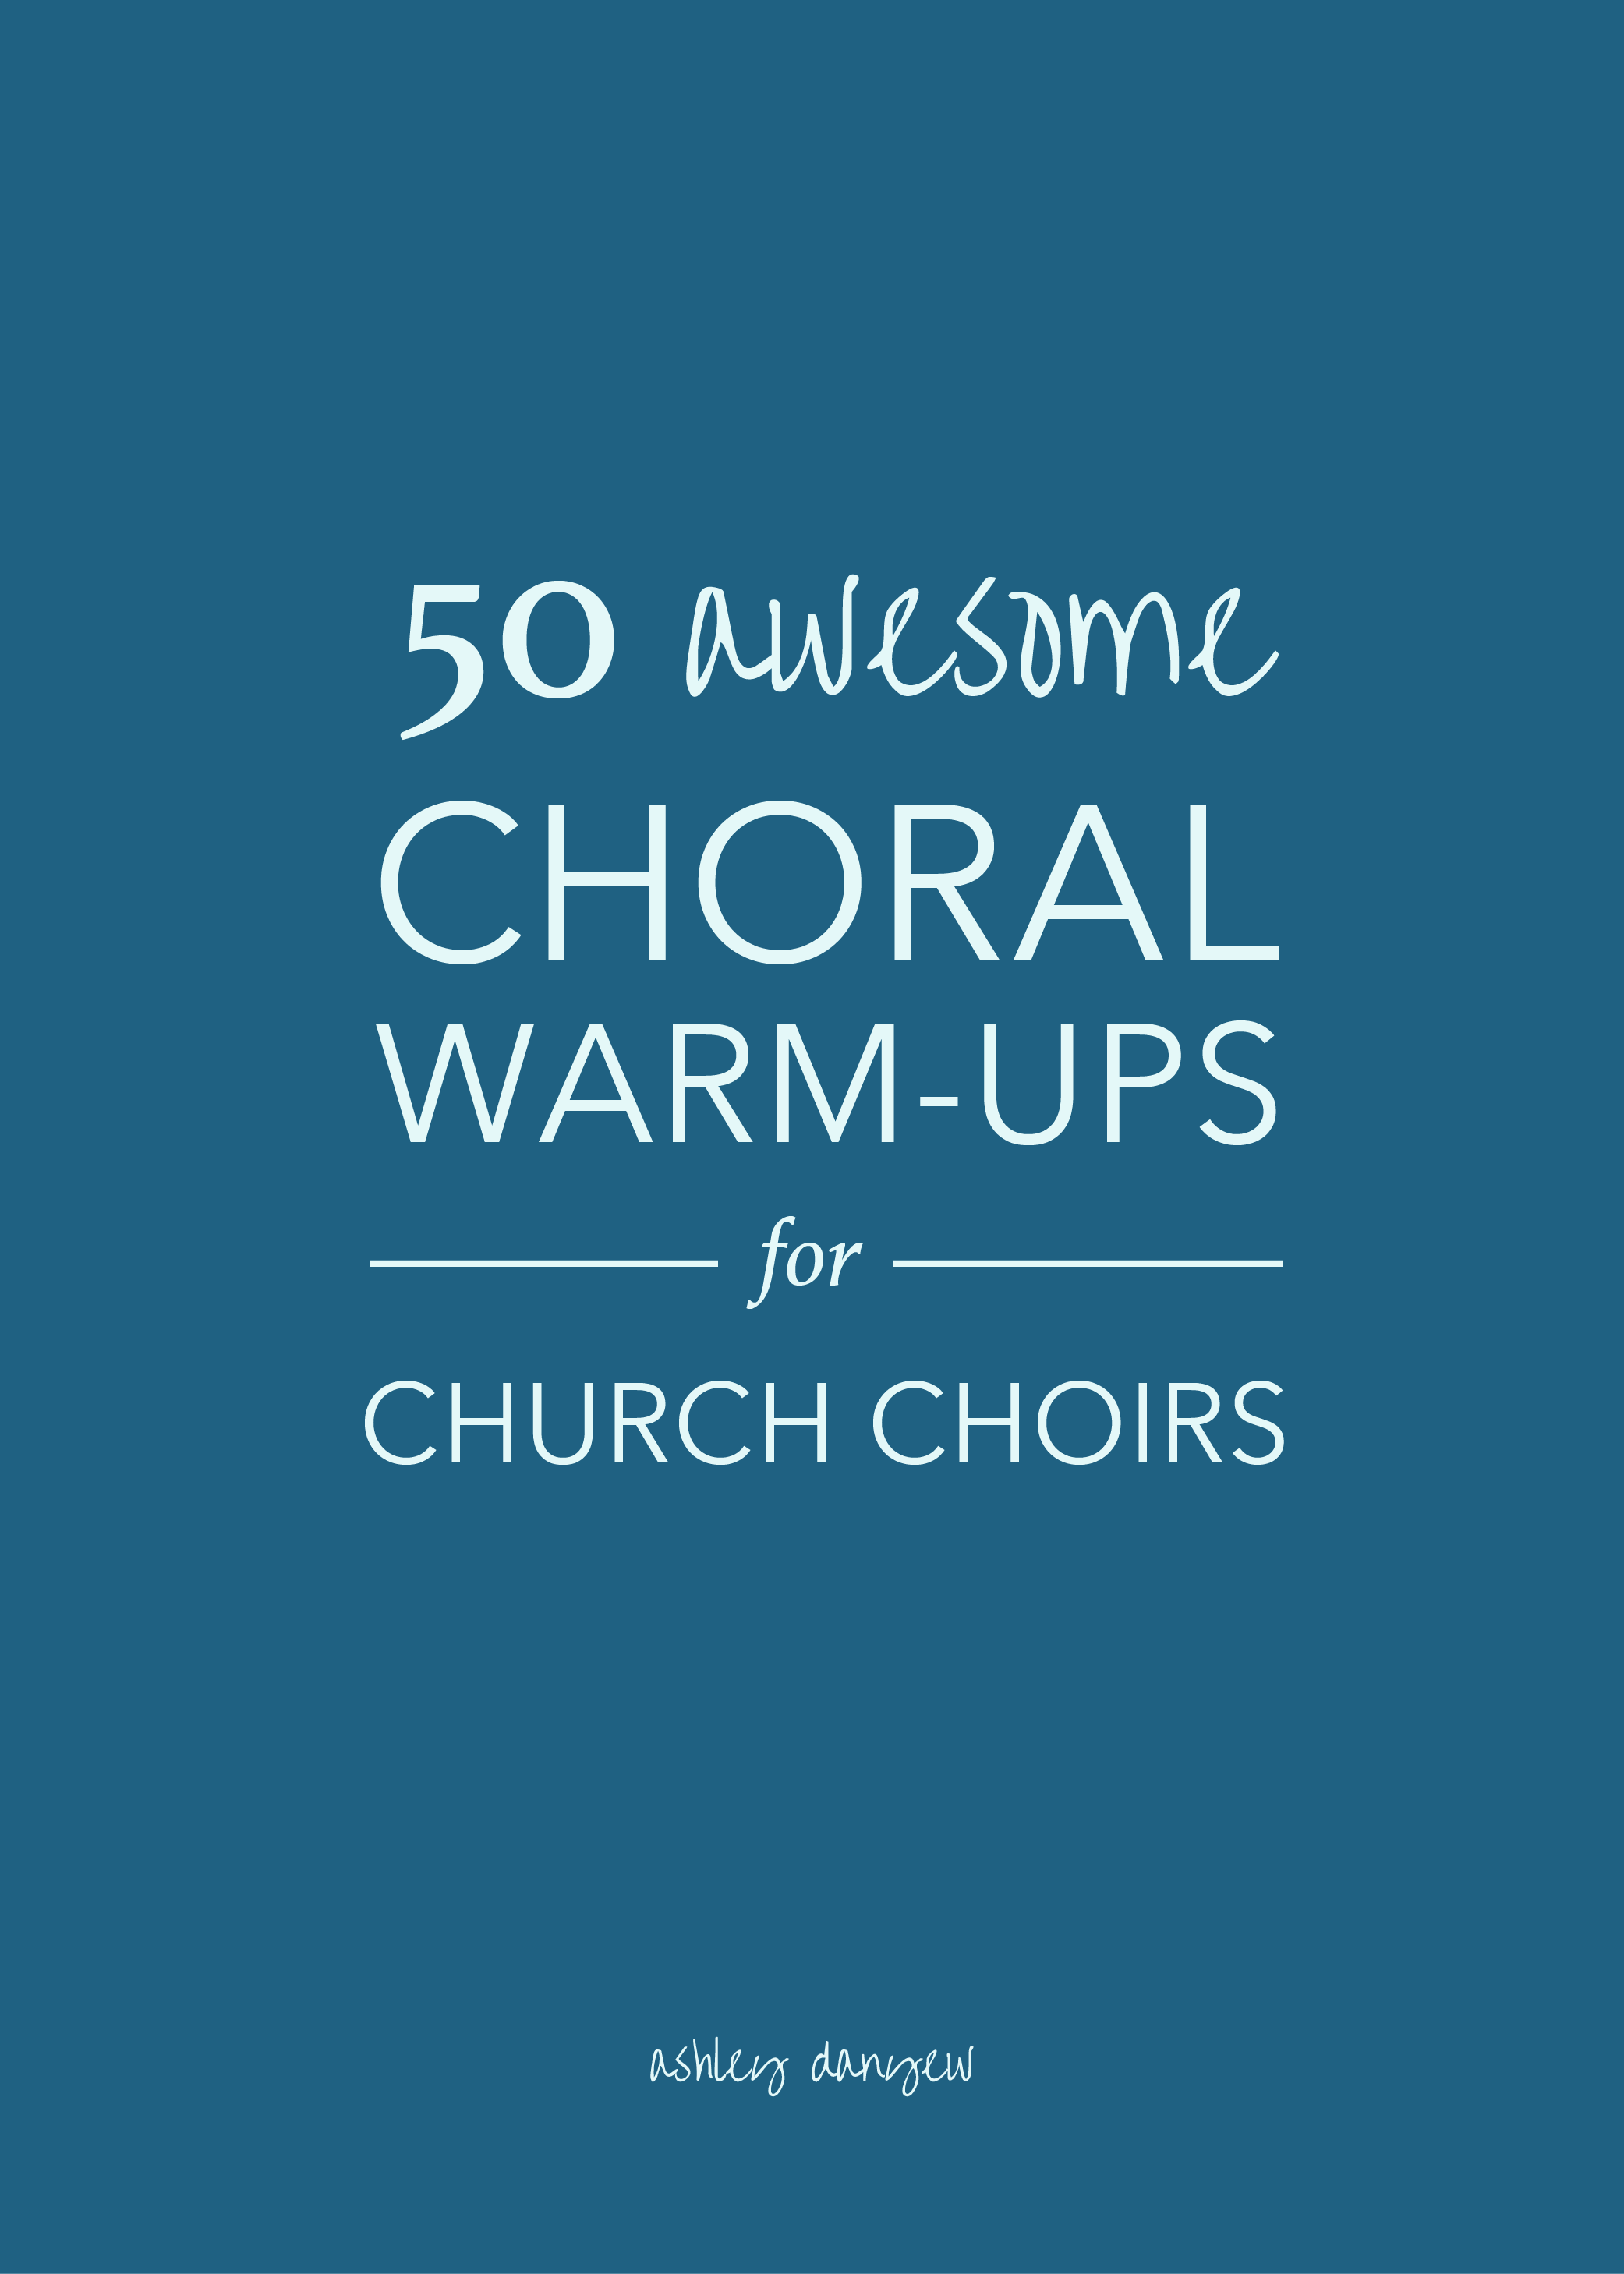 Copy of 50 Awesome Choral Warm-Ups for Church Choirs